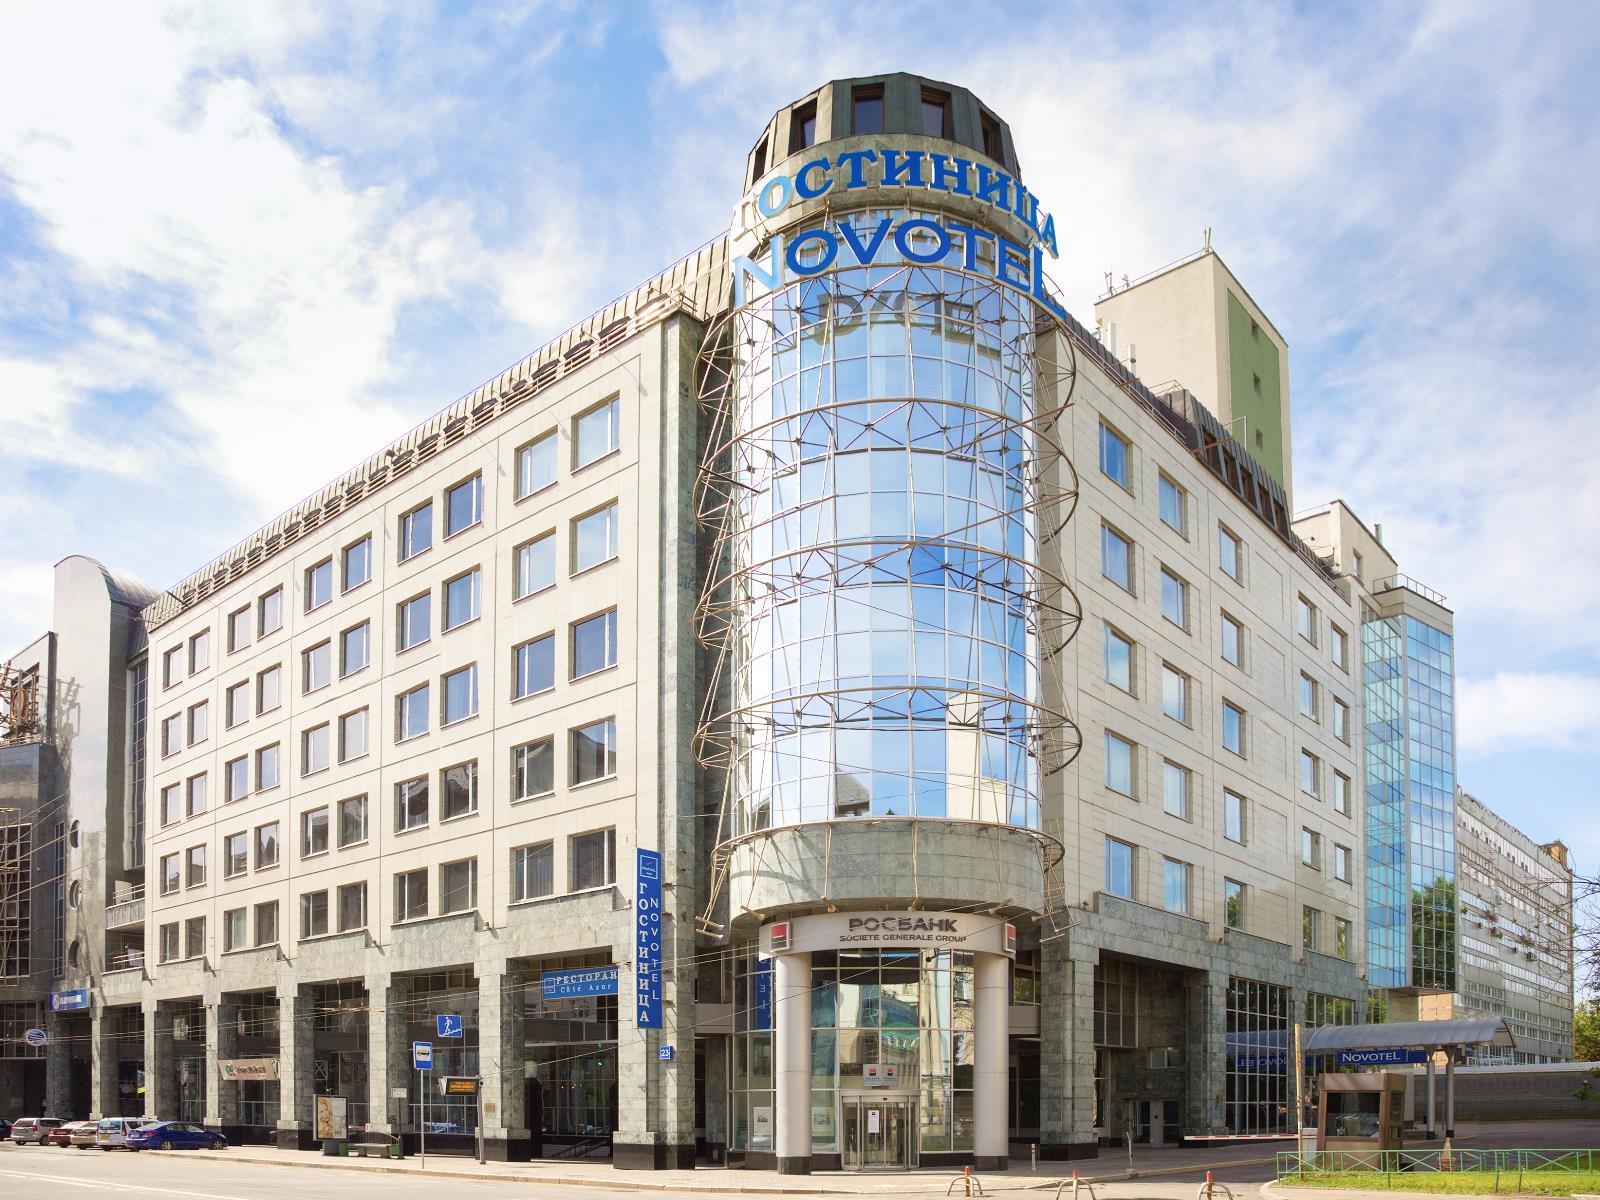 Novotel Moscow Centre Hotel Russia FAQ 2017, What facilities are there in Novotel Moscow Centre Hotel Russia 2017, What Languages Spoken are Supported in Novotel Moscow Centre Hotel Russia 2017, Which payment cards are accepted in Novotel Moscow Centre Hotel Russia , Russia Novotel Moscow Centre Hotel room facilities and services Q&A 2017, Russia Novotel Moscow Centre Hotel online booking services 2017, Russia Novotel Moscow Centre Hotel address 2017, Russia Novotel Moscow Centre Hotel telephone number 2017,Russia Novotel Moscow Centre Hotel map 2017, Russia Novotel Moscow Centre Hotel traffic guide 2017, how to go Russia Novotel Moscow Centre Hotel, Russia Novotel Moscow Centre Hotel booking online 2017, Russia Novotel Moscow Centre Hotel room types 2017.